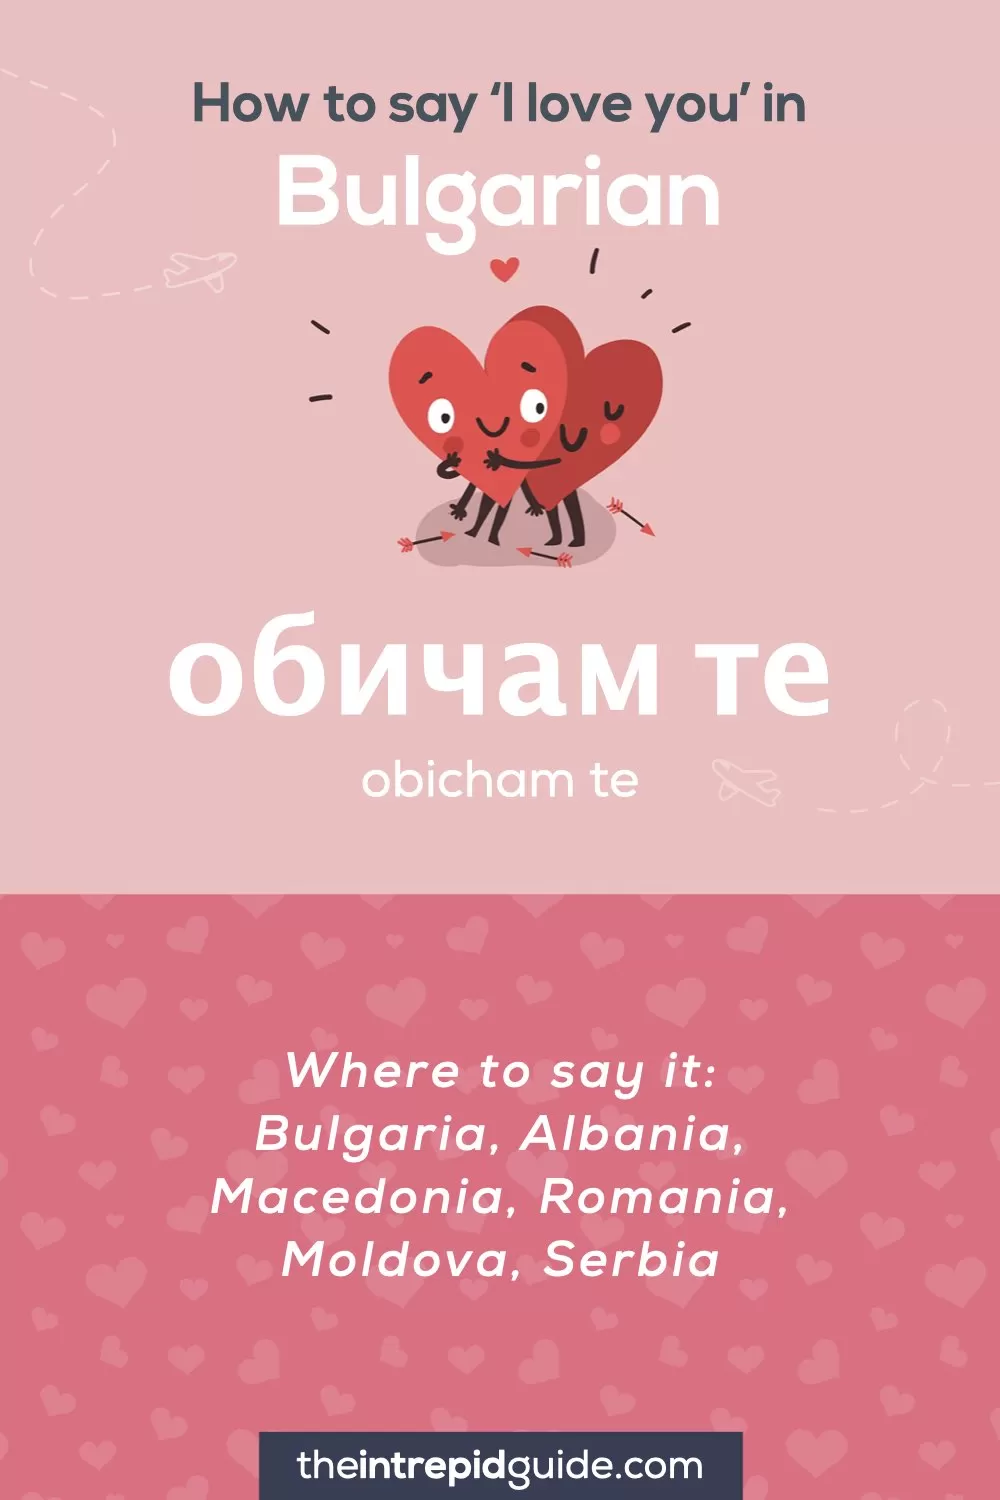 How to say I love you in different languages - Bulgarian - обичам те